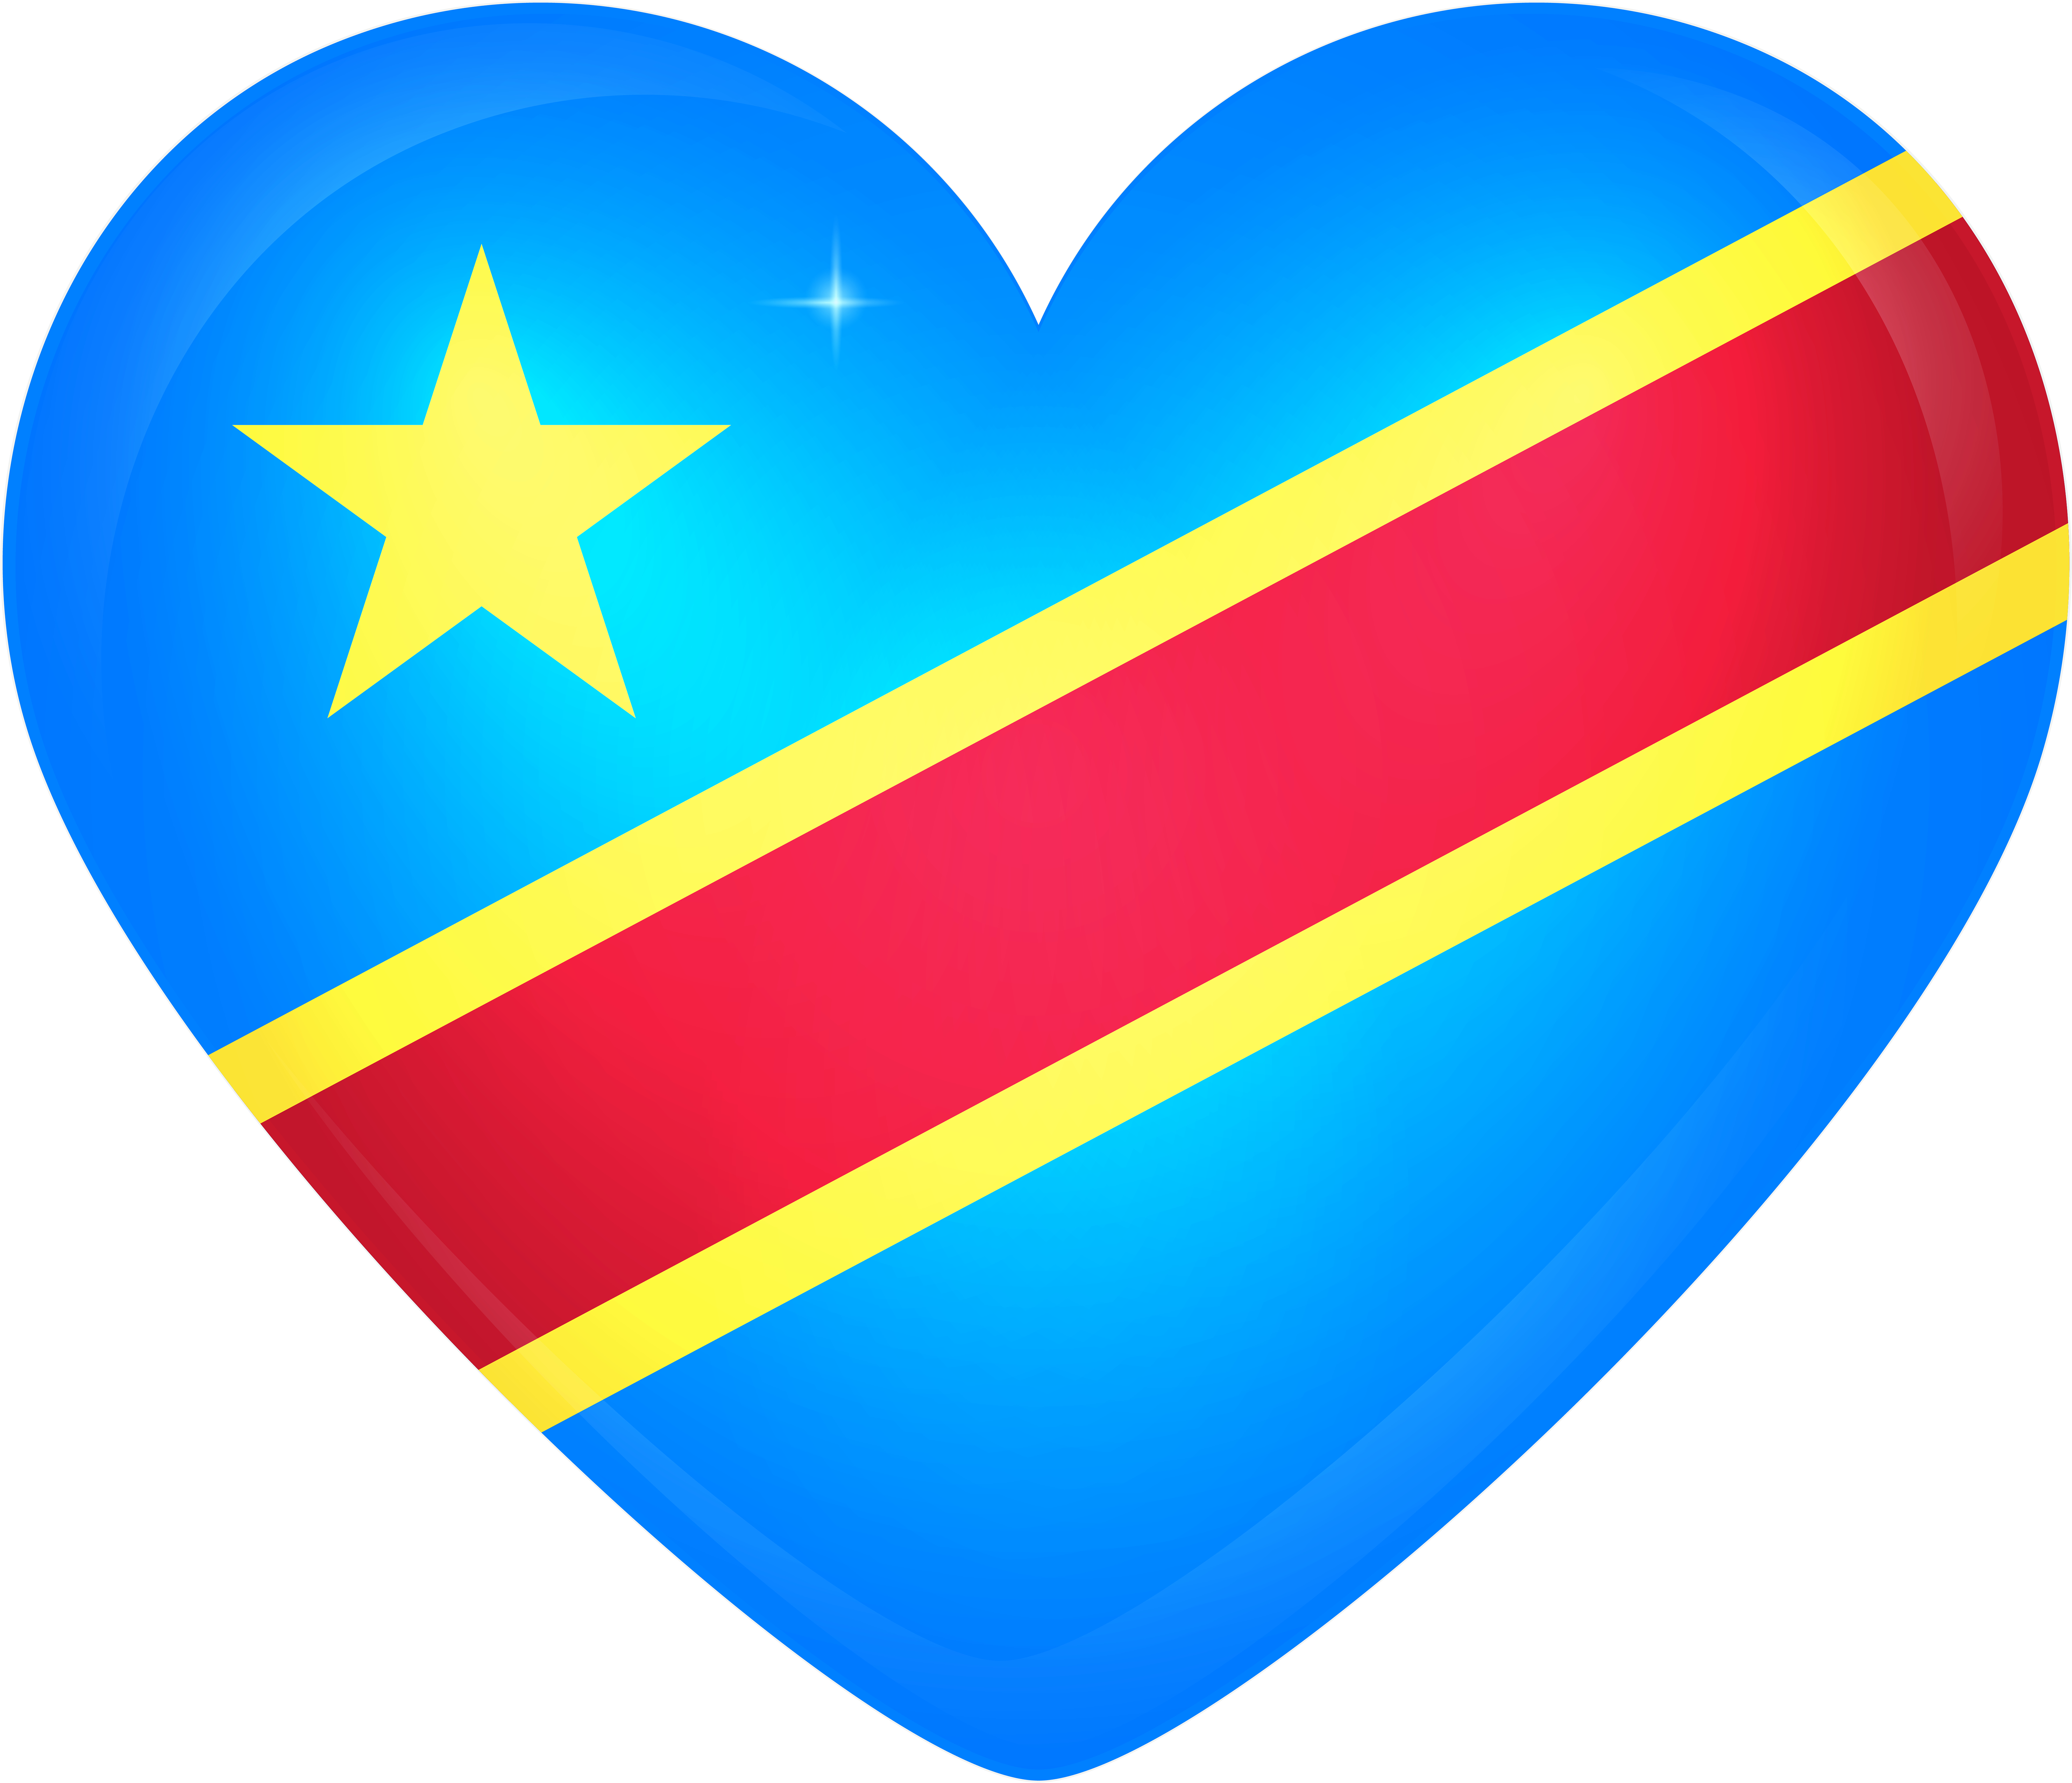 A Blue Heart With A Red Stripe And A Yellow Star